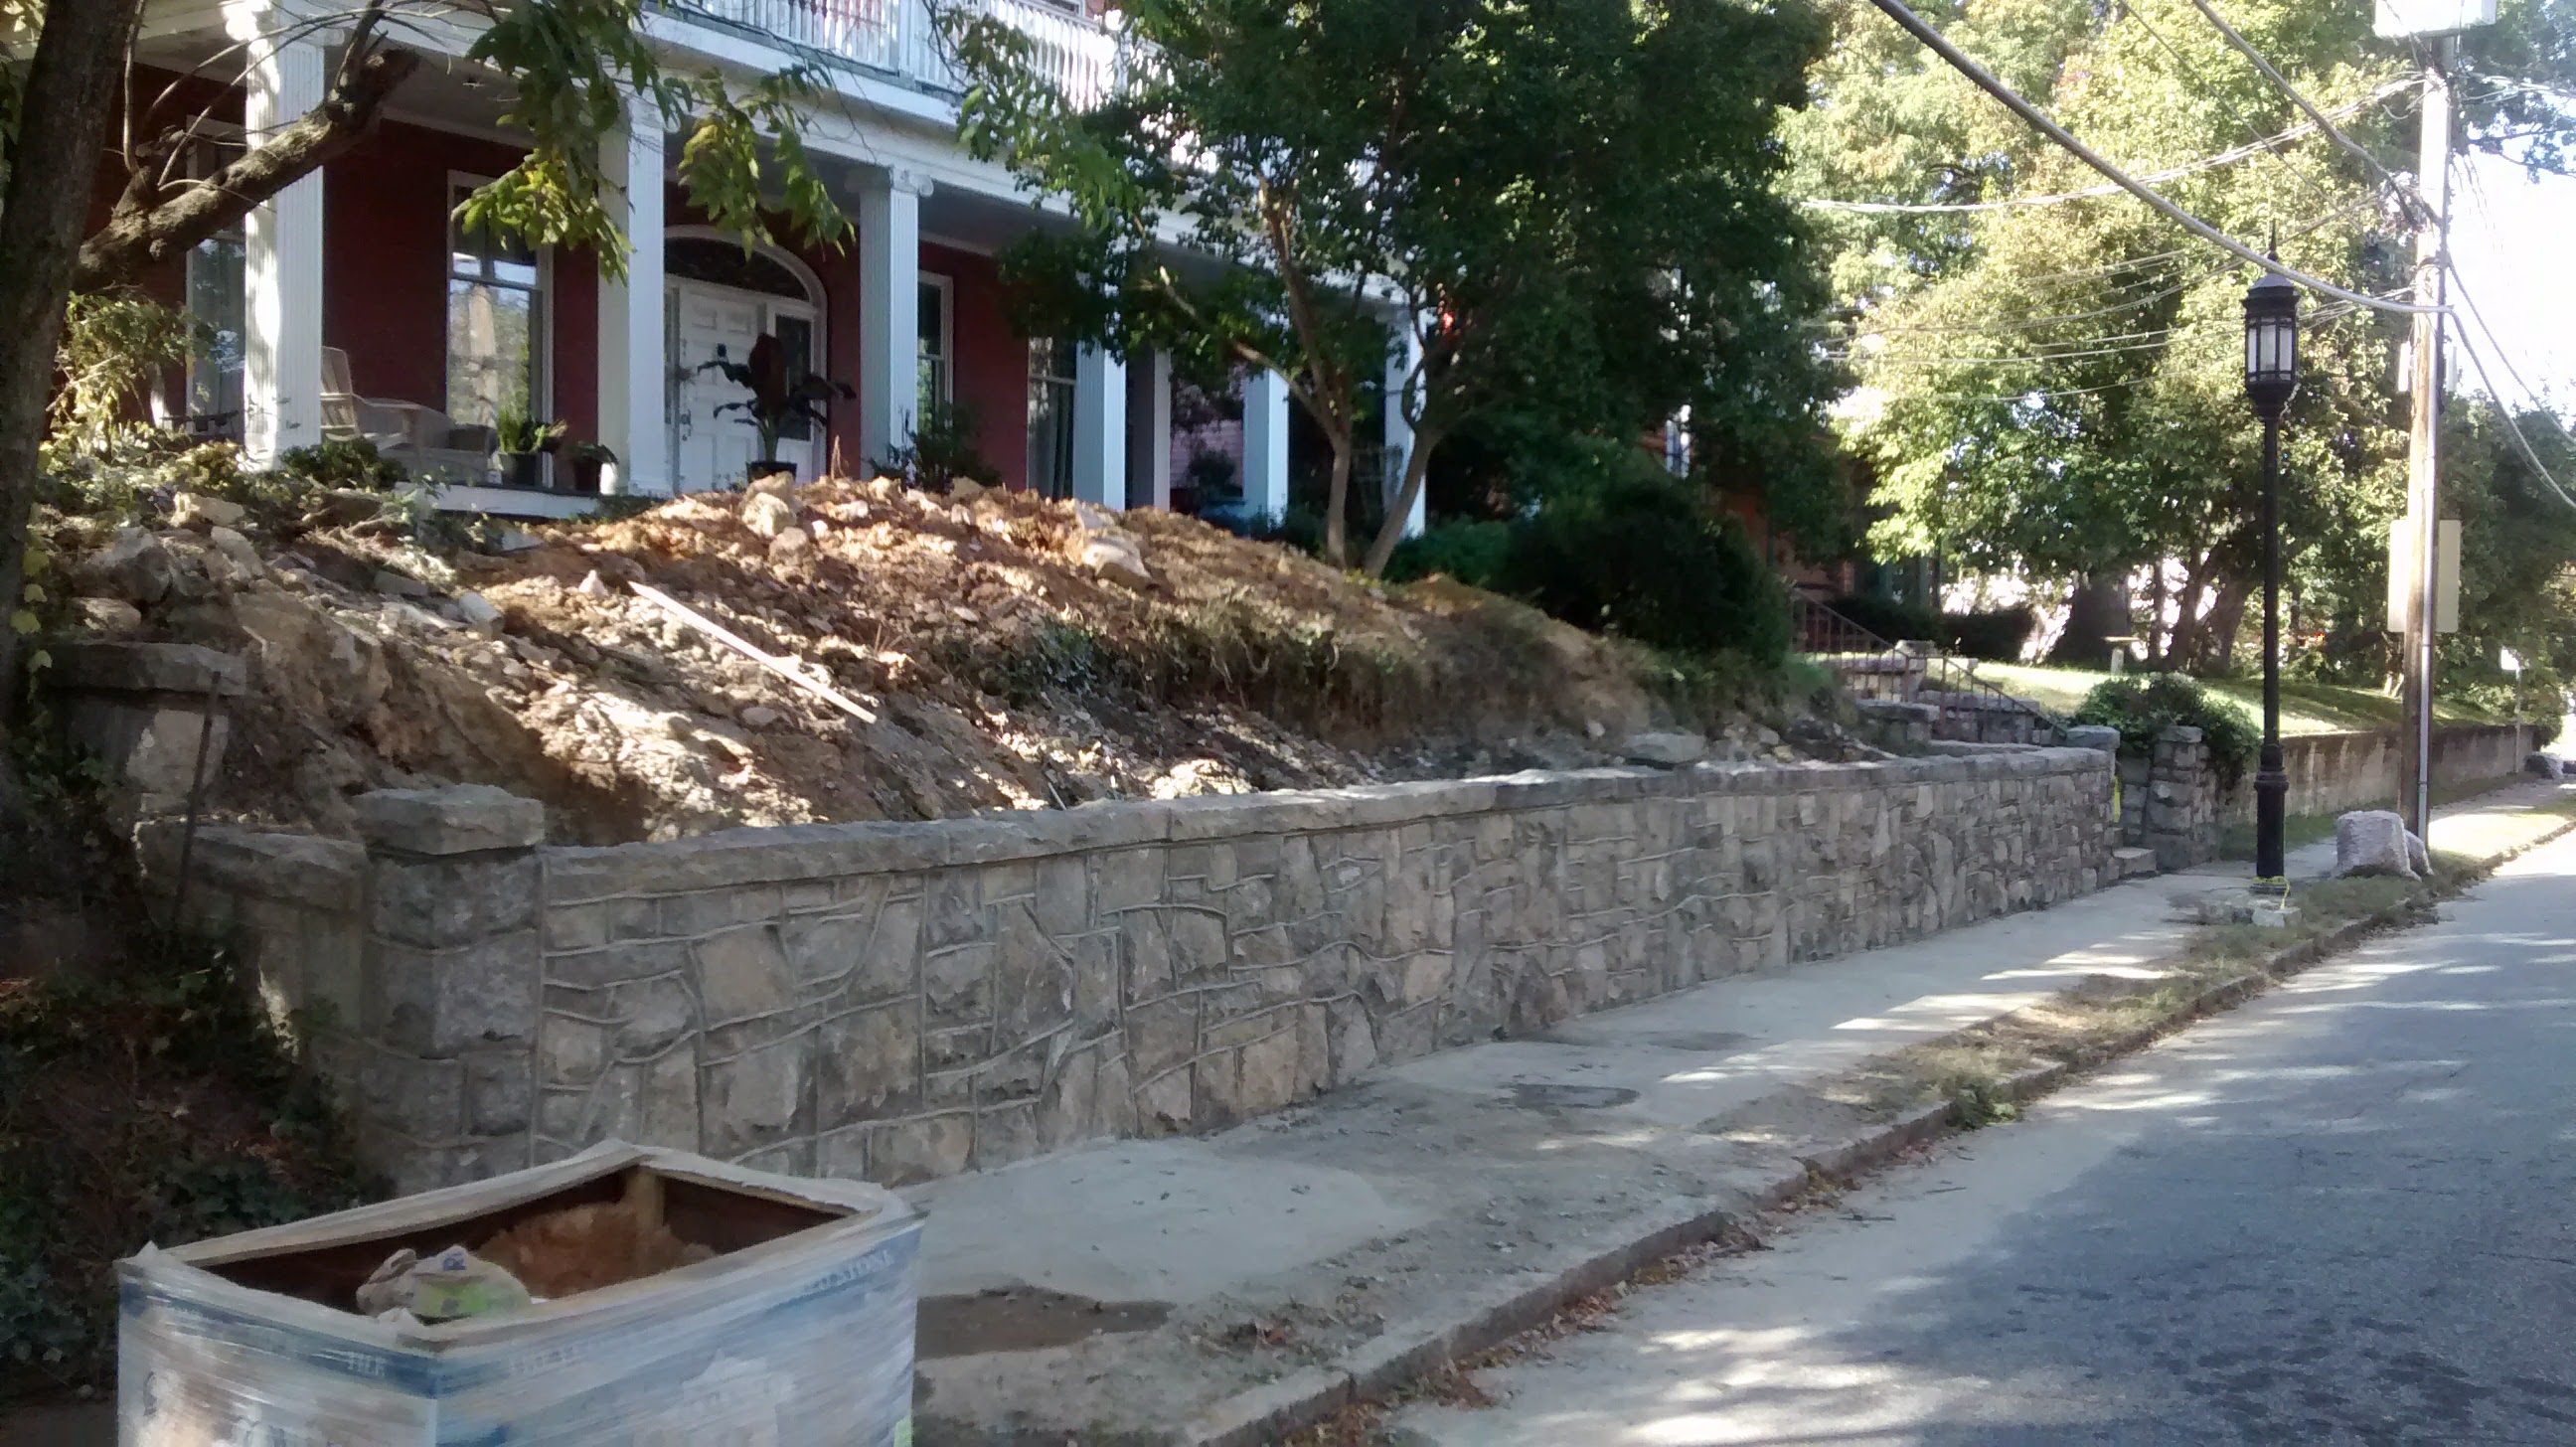 rebuilt wall at 110 south mendenhall, seen from the street